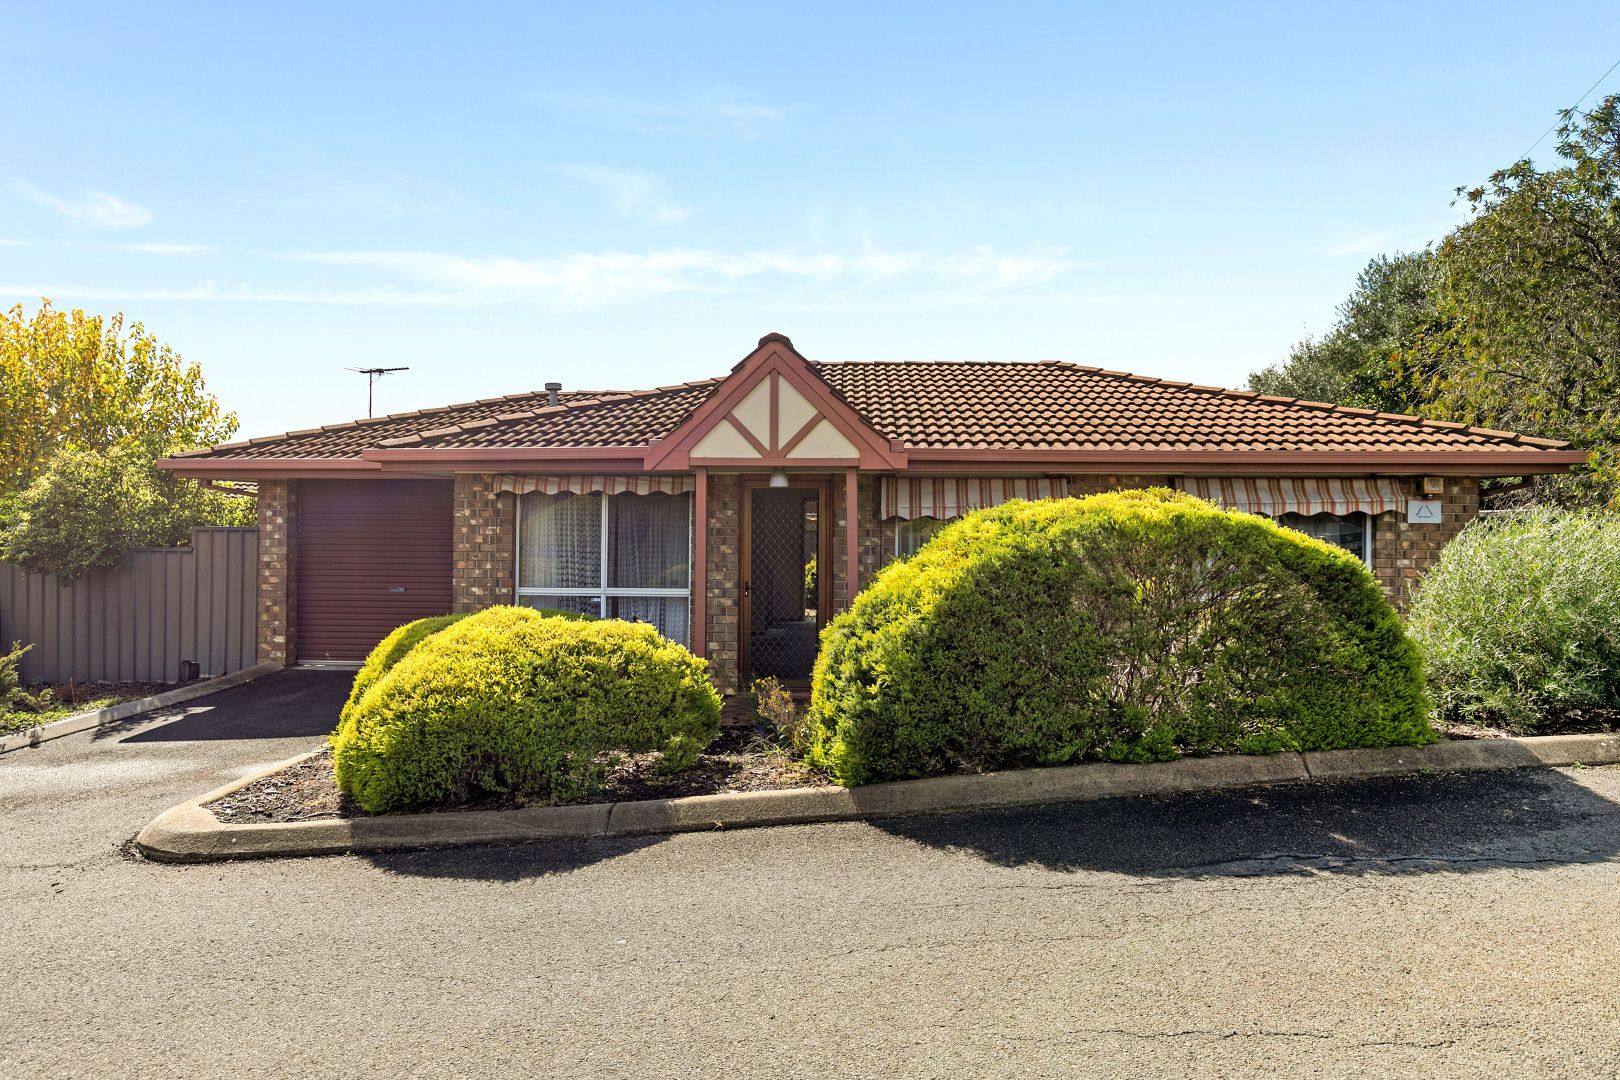 1/2 Hectorville Road, Hectorville SA 5073